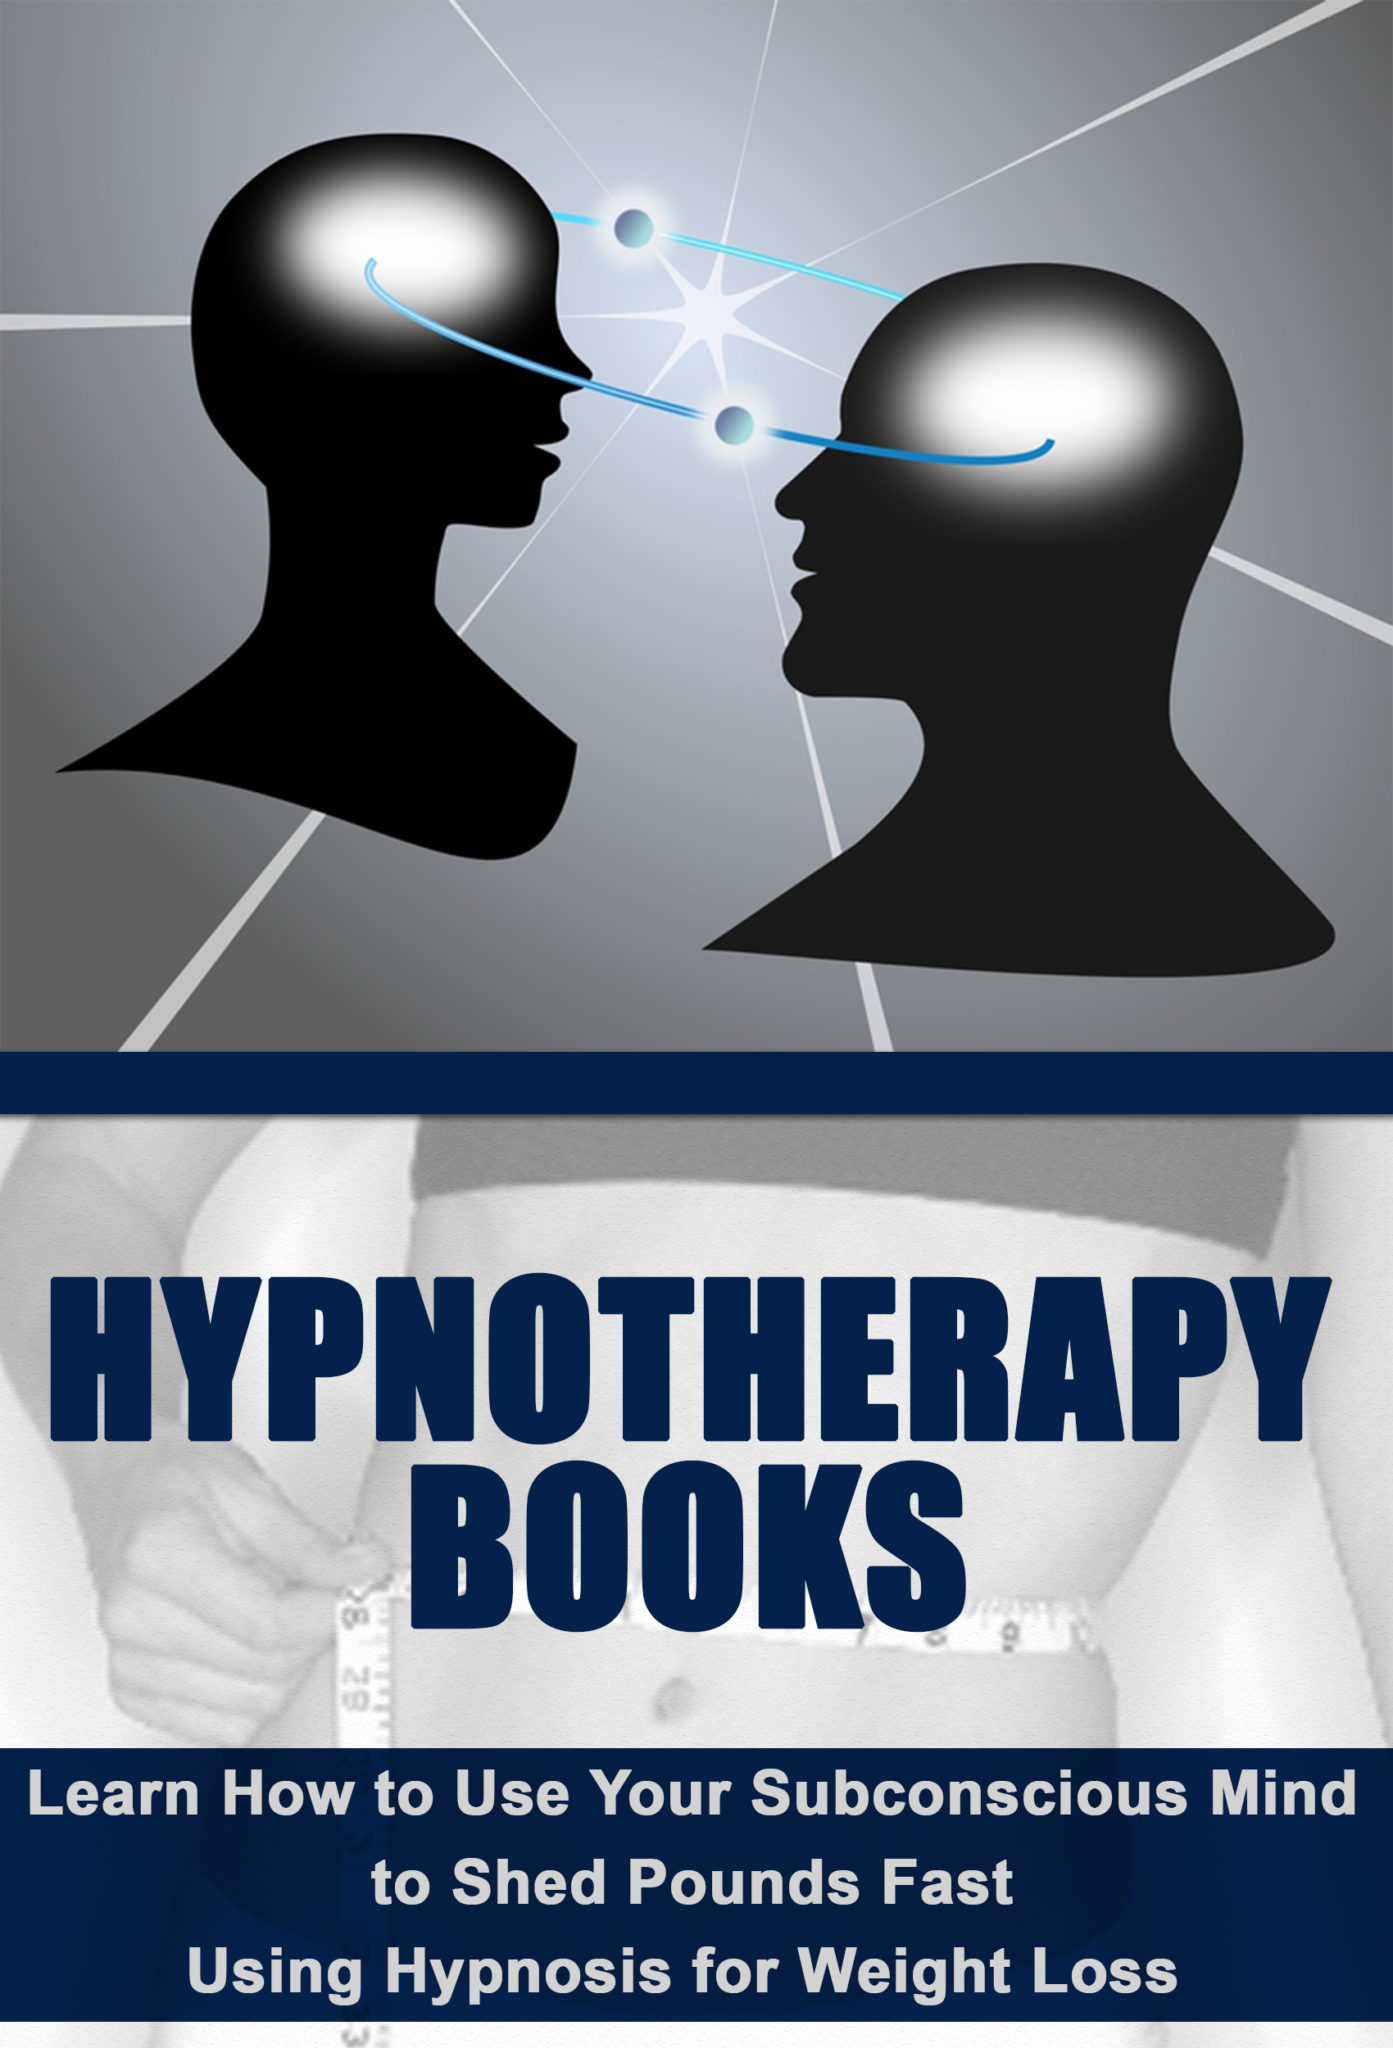 FREE: Hypnotherapy: Learn How to Use Hypnotherapy Scripts to Shed Pounds Fast Using Hypnotherapy Weight Loss by Kim Anthony